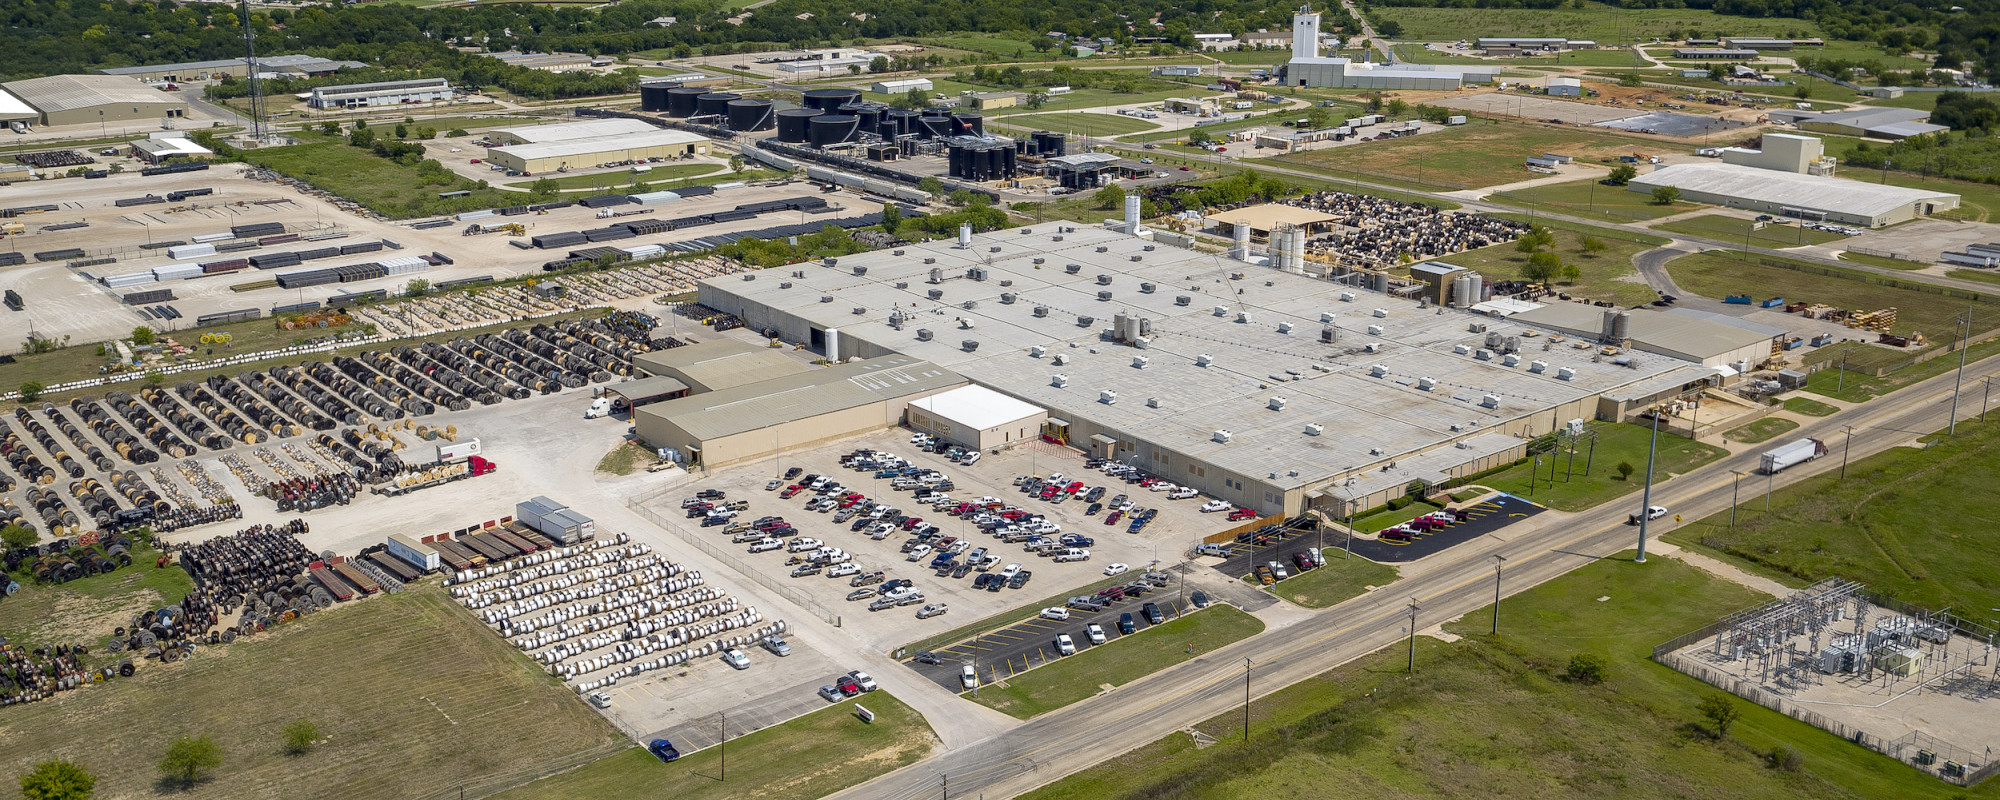 aerial view of industrial complex